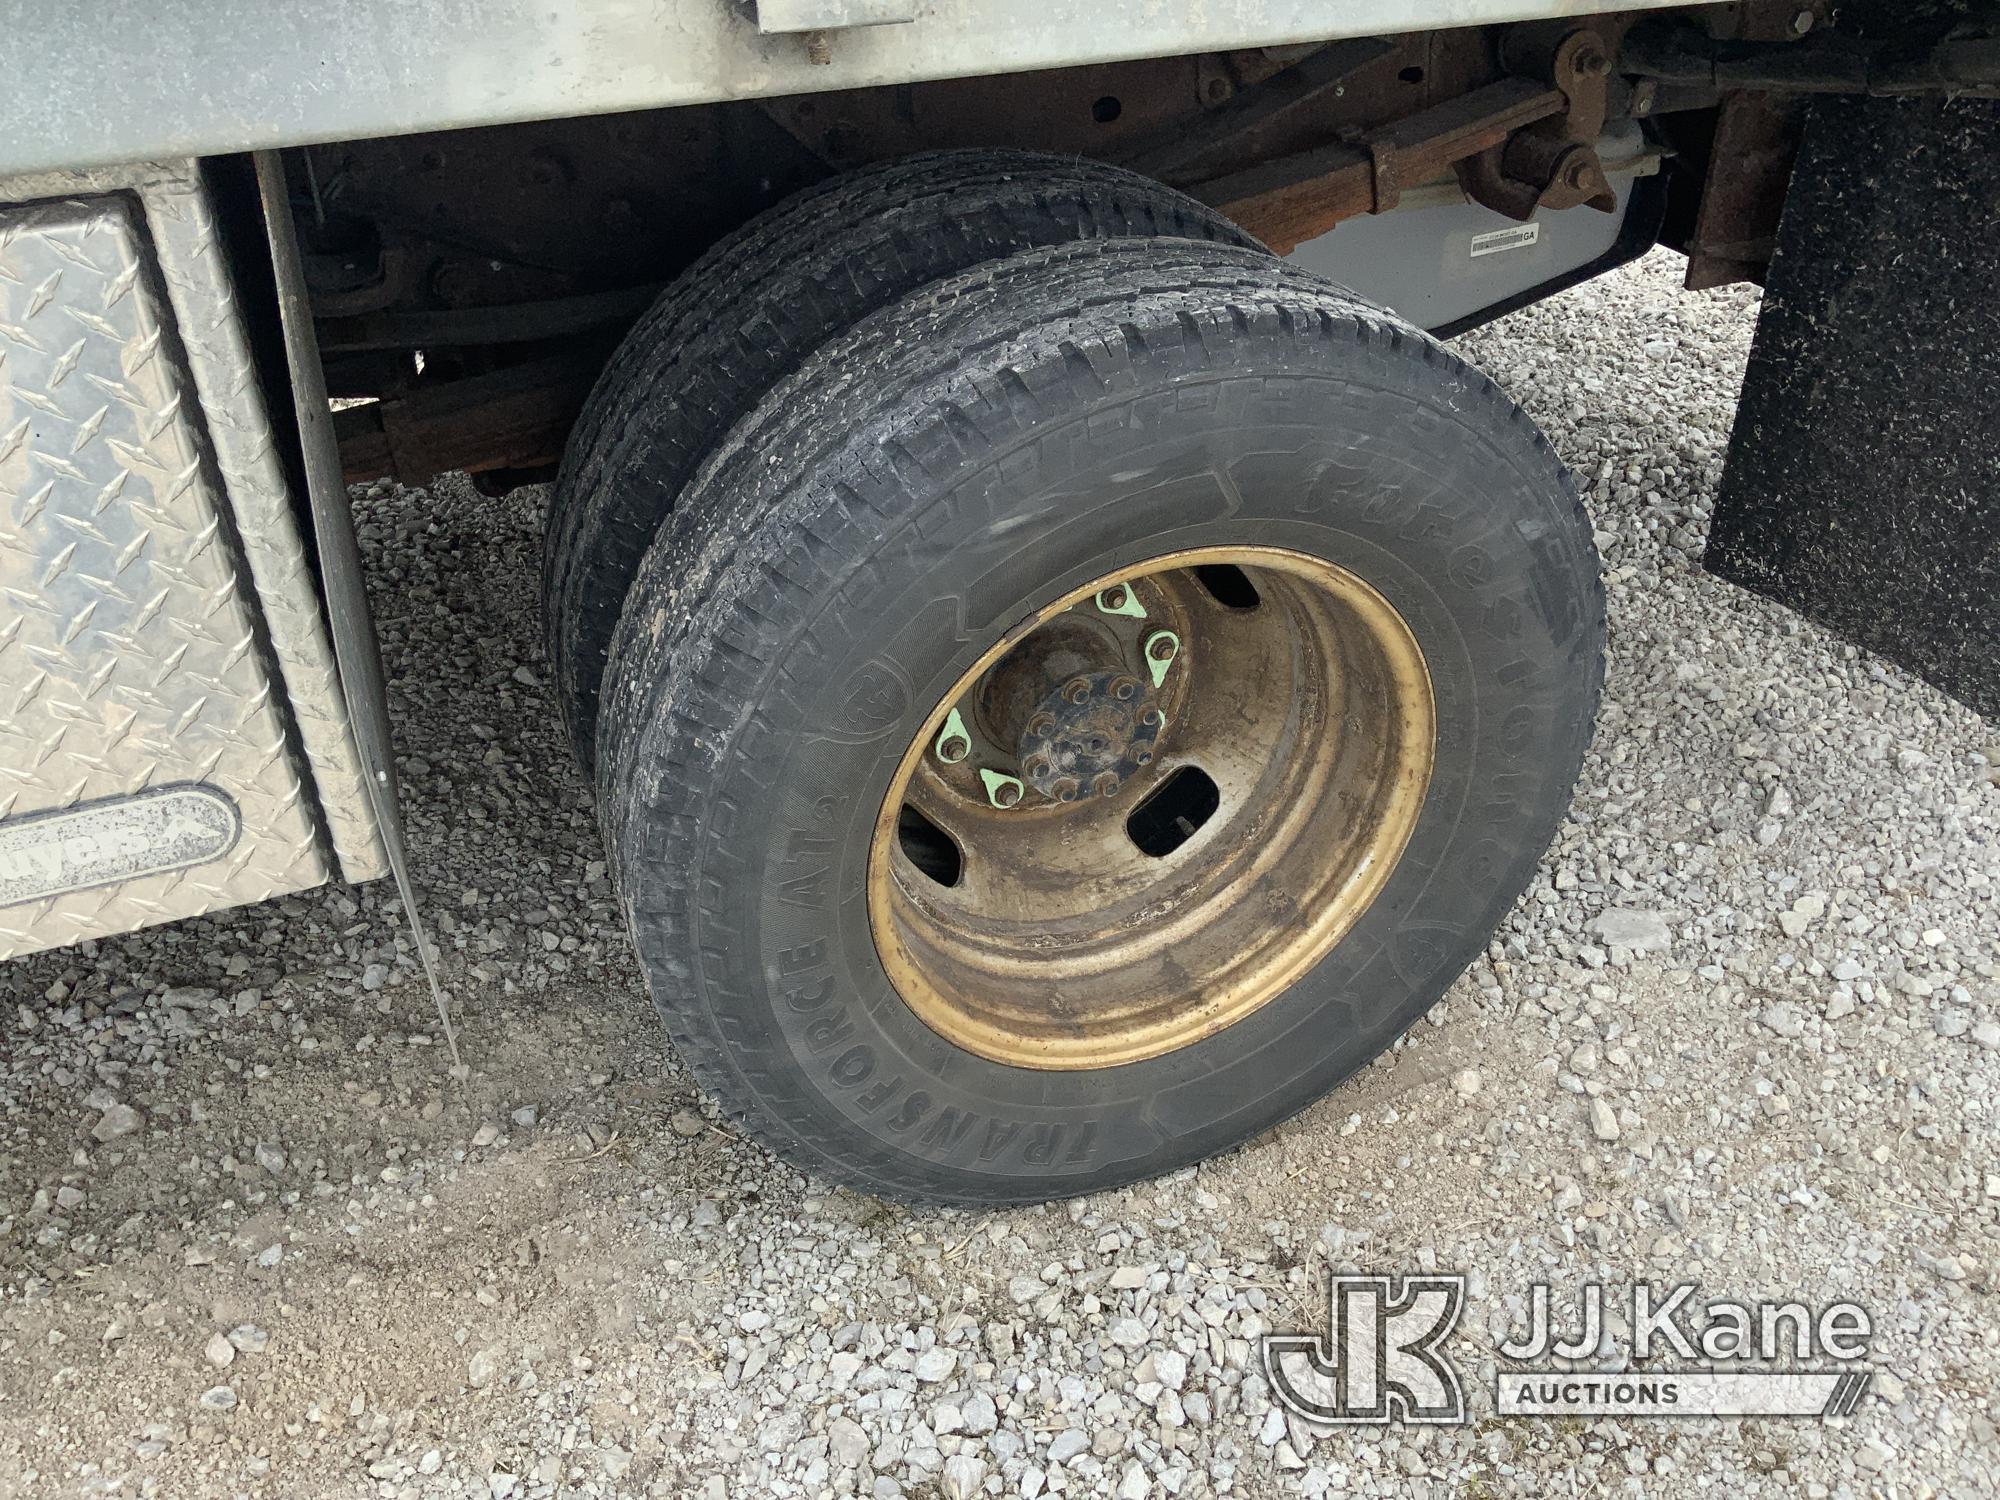 (Fort Wayne, IN) 2012 Ford F350 4x4 Flatbed Truck Runs) (Will Not Move, Bad Transmission